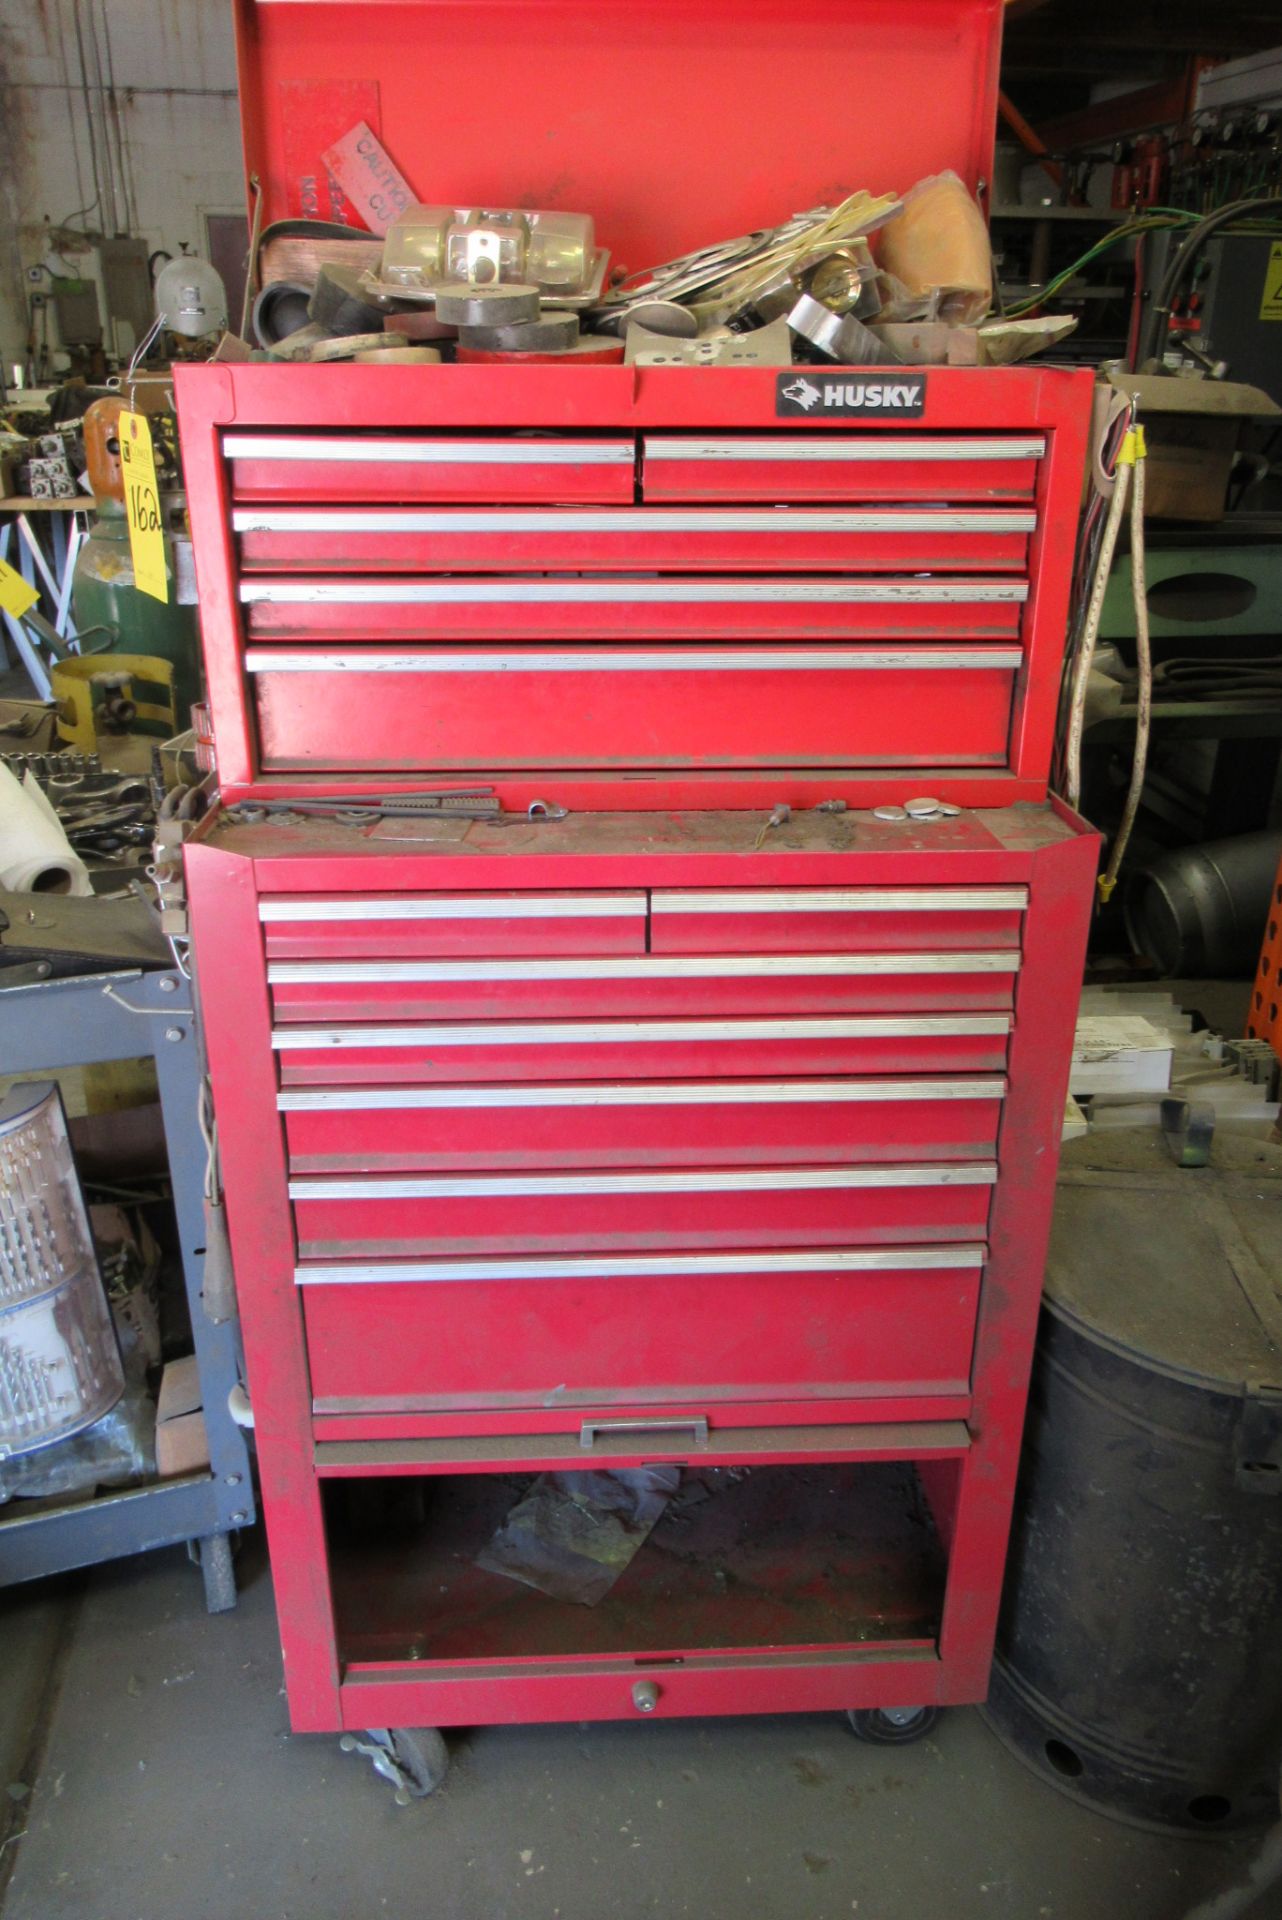 Husky Rolling Tool Chest w/Contents, Tools, Tape, Etc. (Lot)